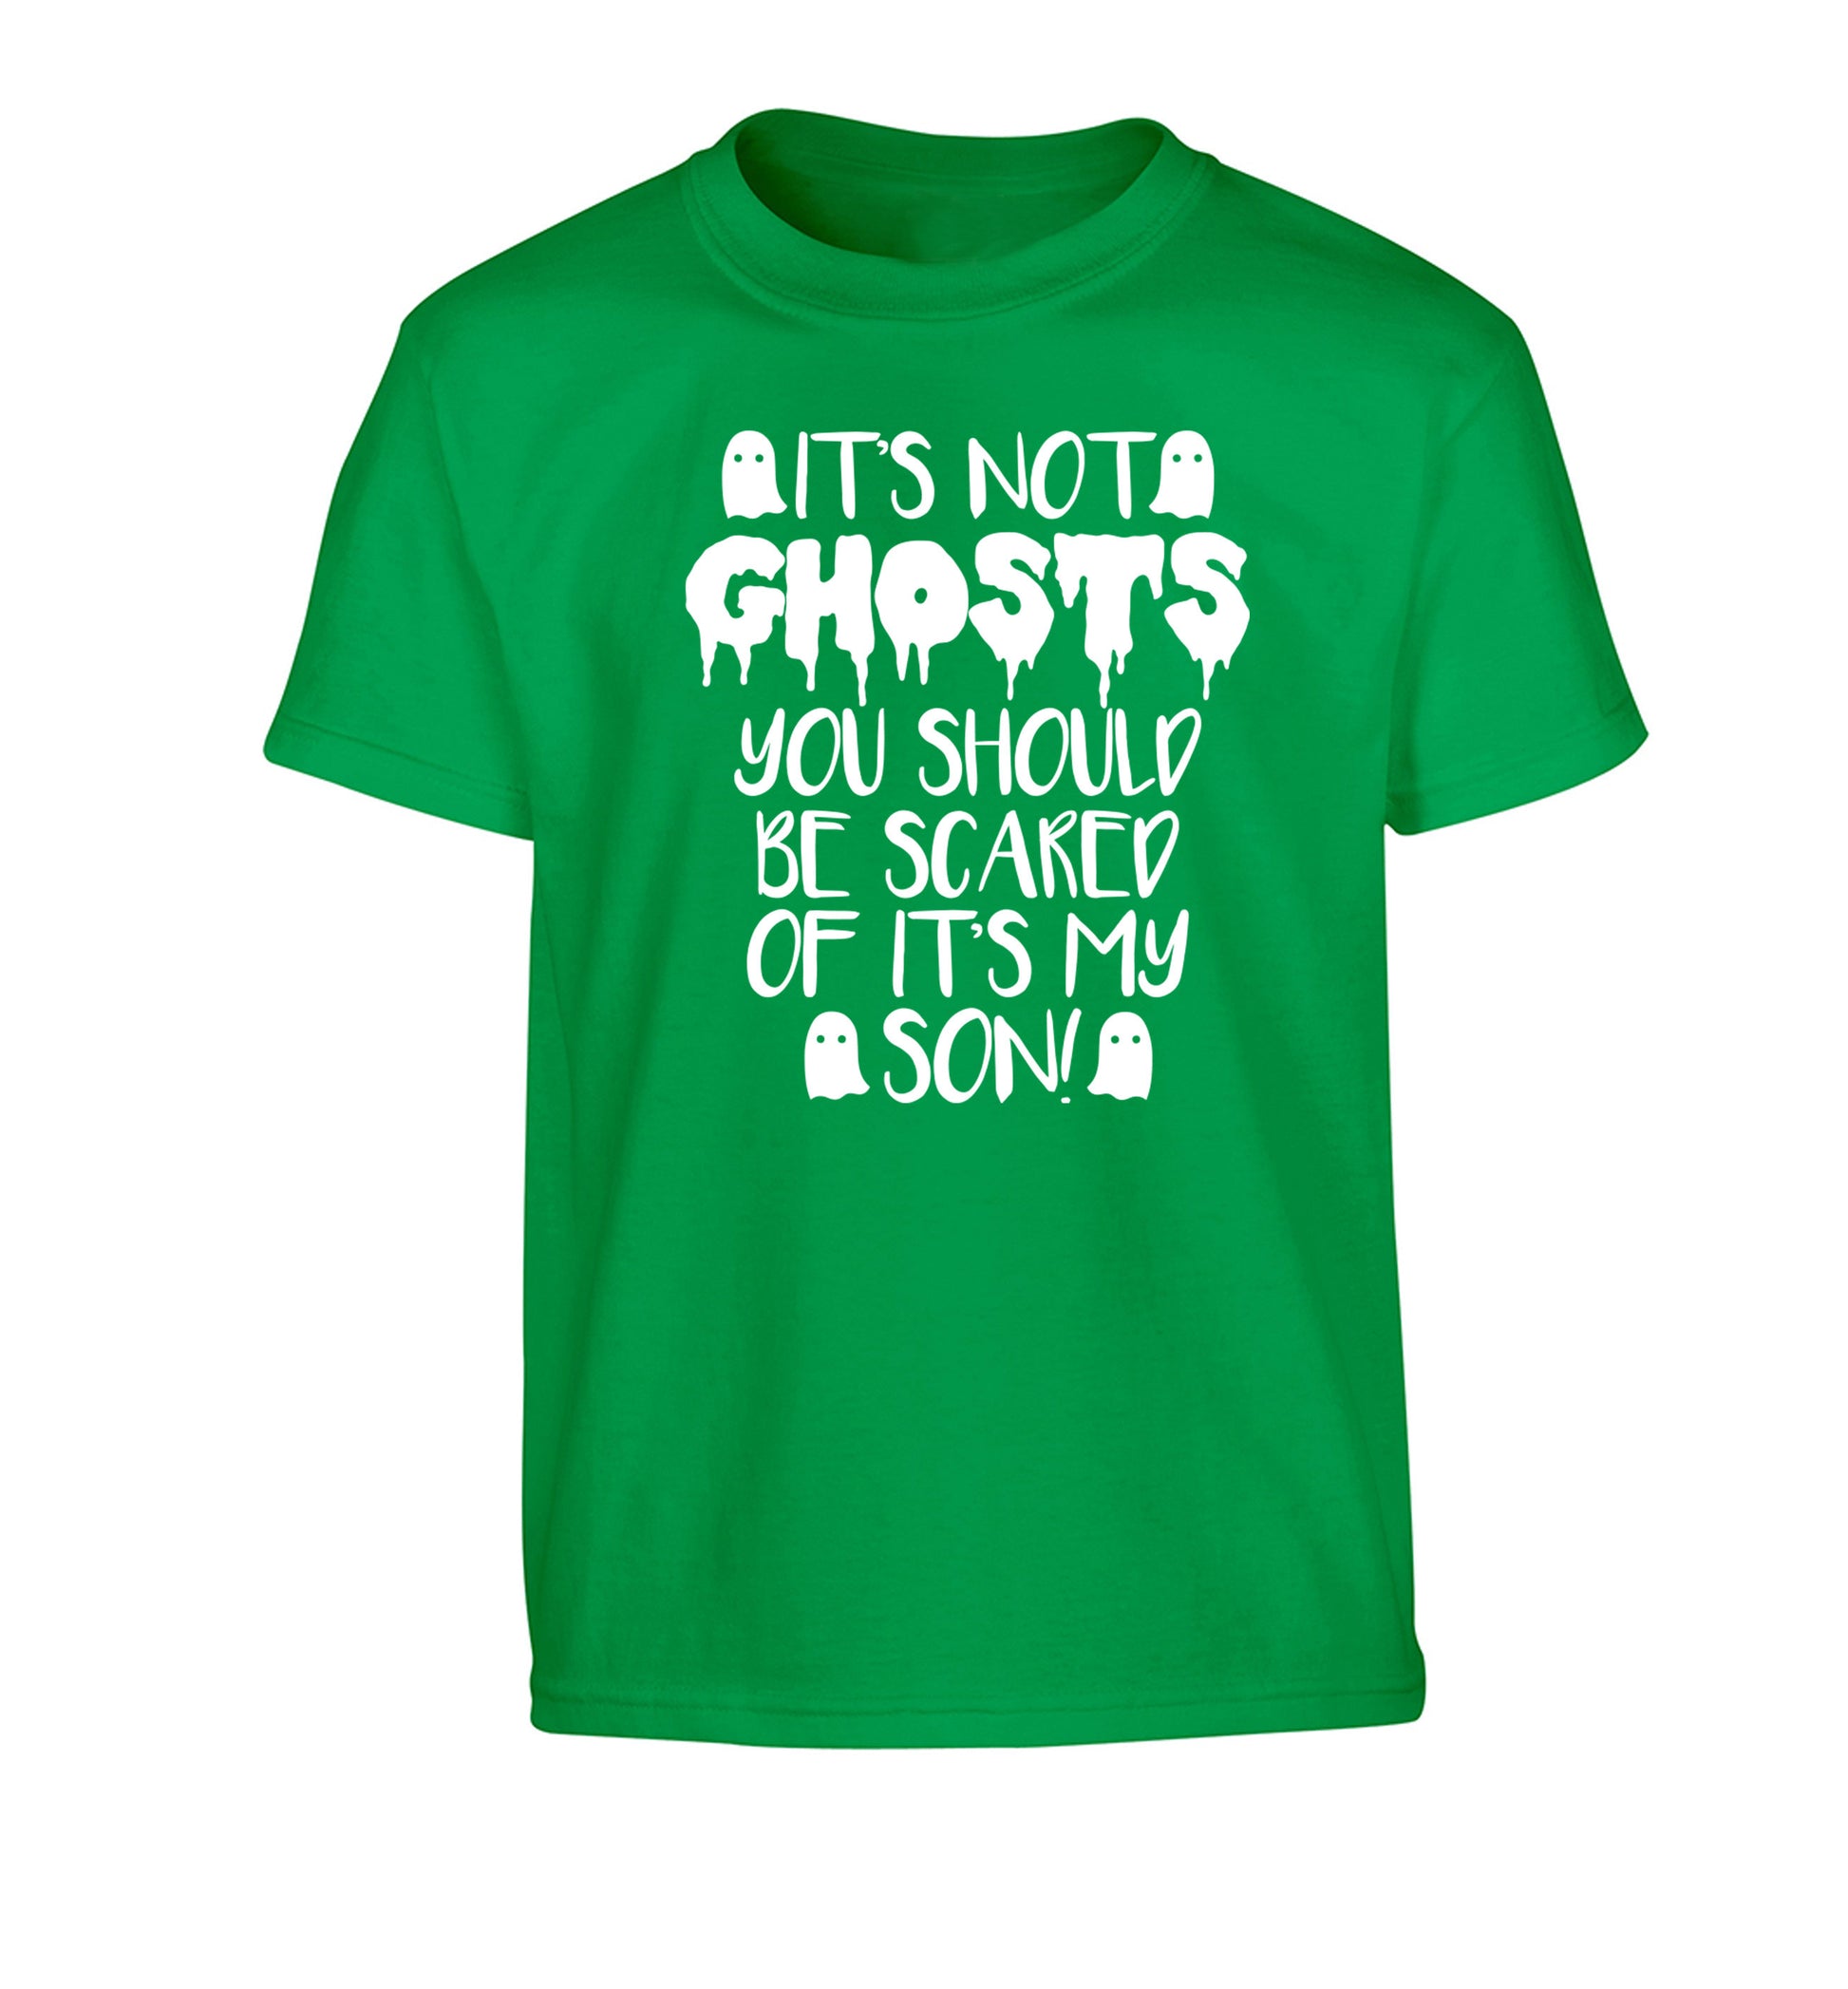 It's not ghosts you should be scared of it's my son! Children's green Tshirt 12-14 Years